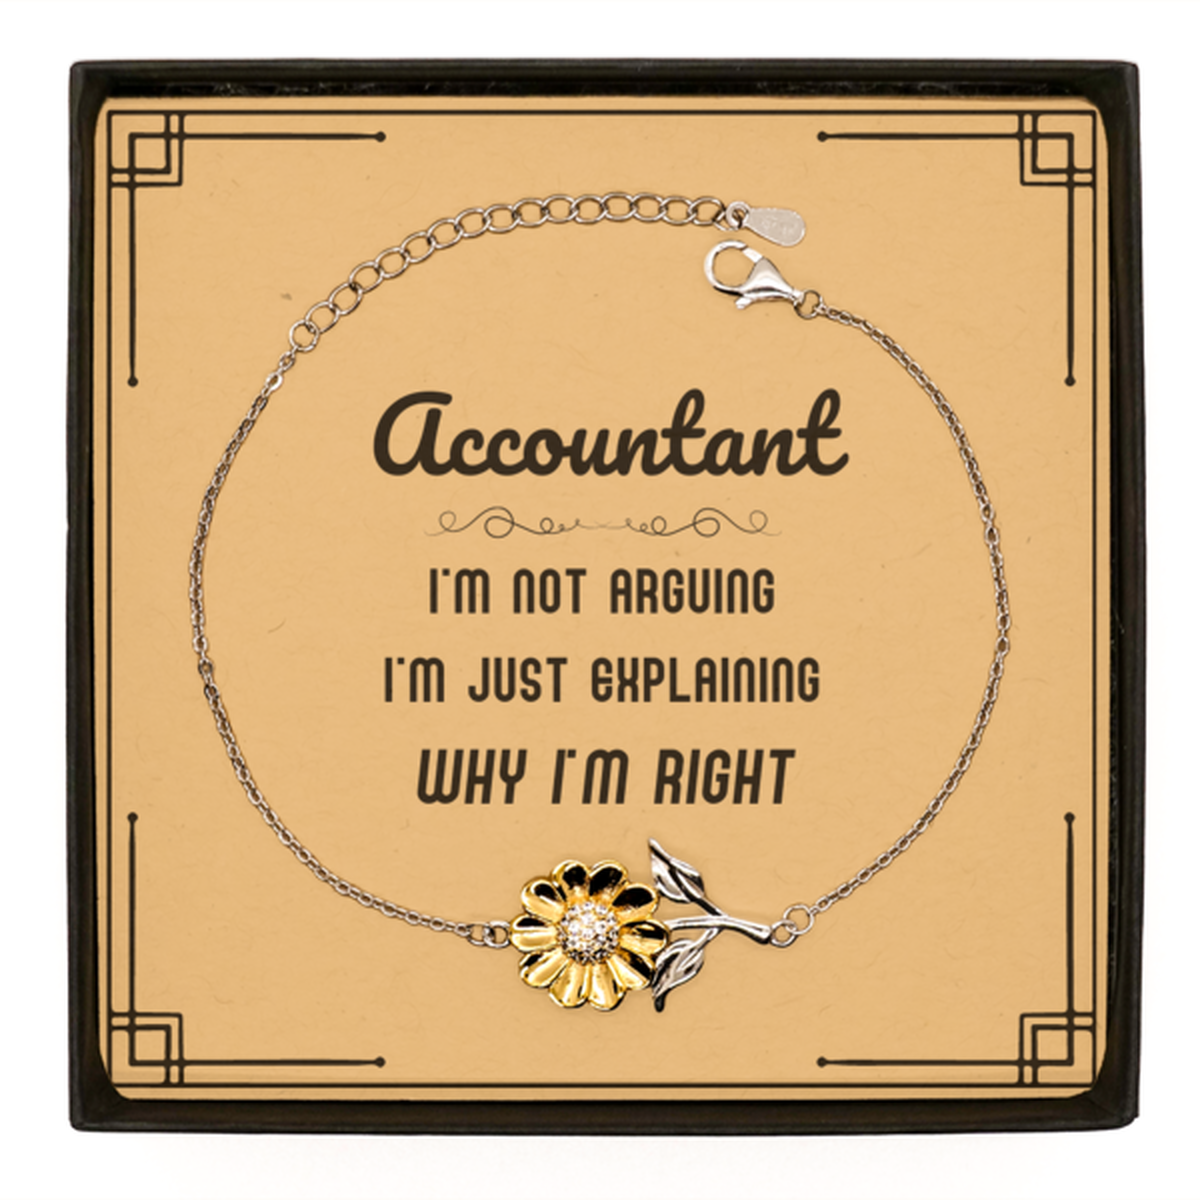 Accountant I'm not Arguing. I'm Just Explaining Why I'm RIGHT Sunflower Bracelet, Funny Saying Quote Accountant Gifts For Accountant Message Card Graduation Birthday Christmas Gifts for Men Women Coworker